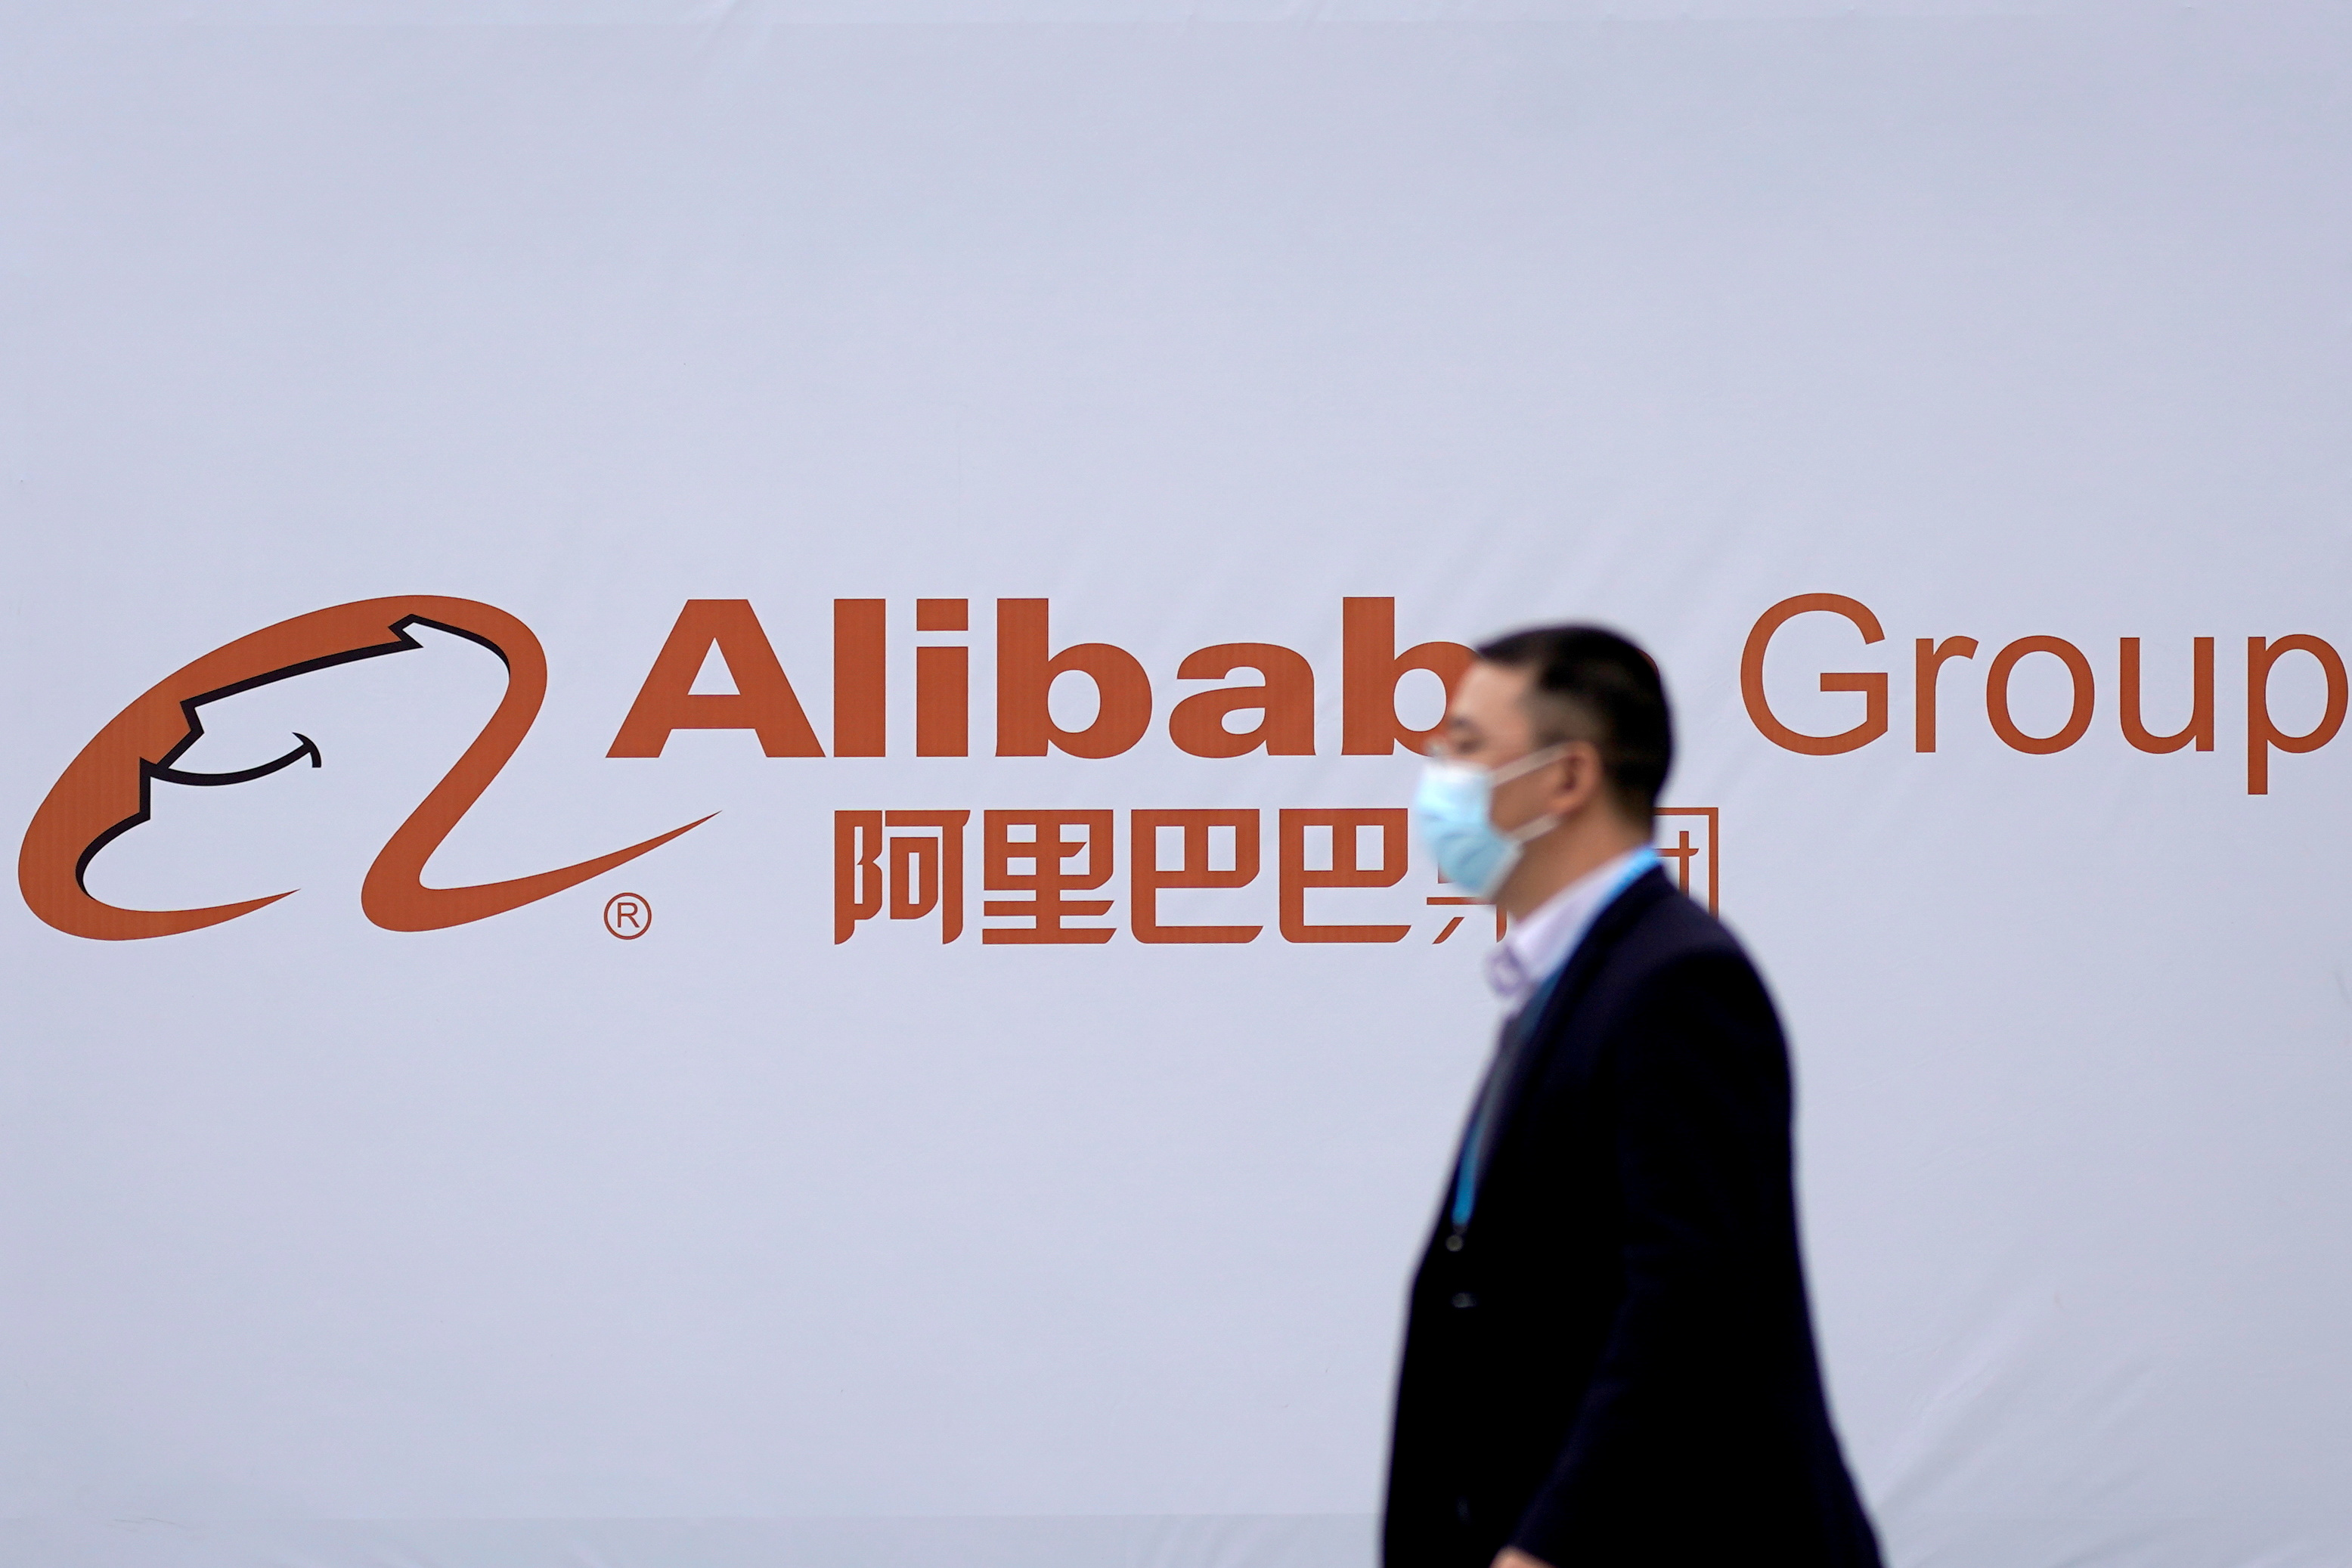 A logo of Alibaba Group is seen during the World Internet Conference (WIC) in Wuzhen